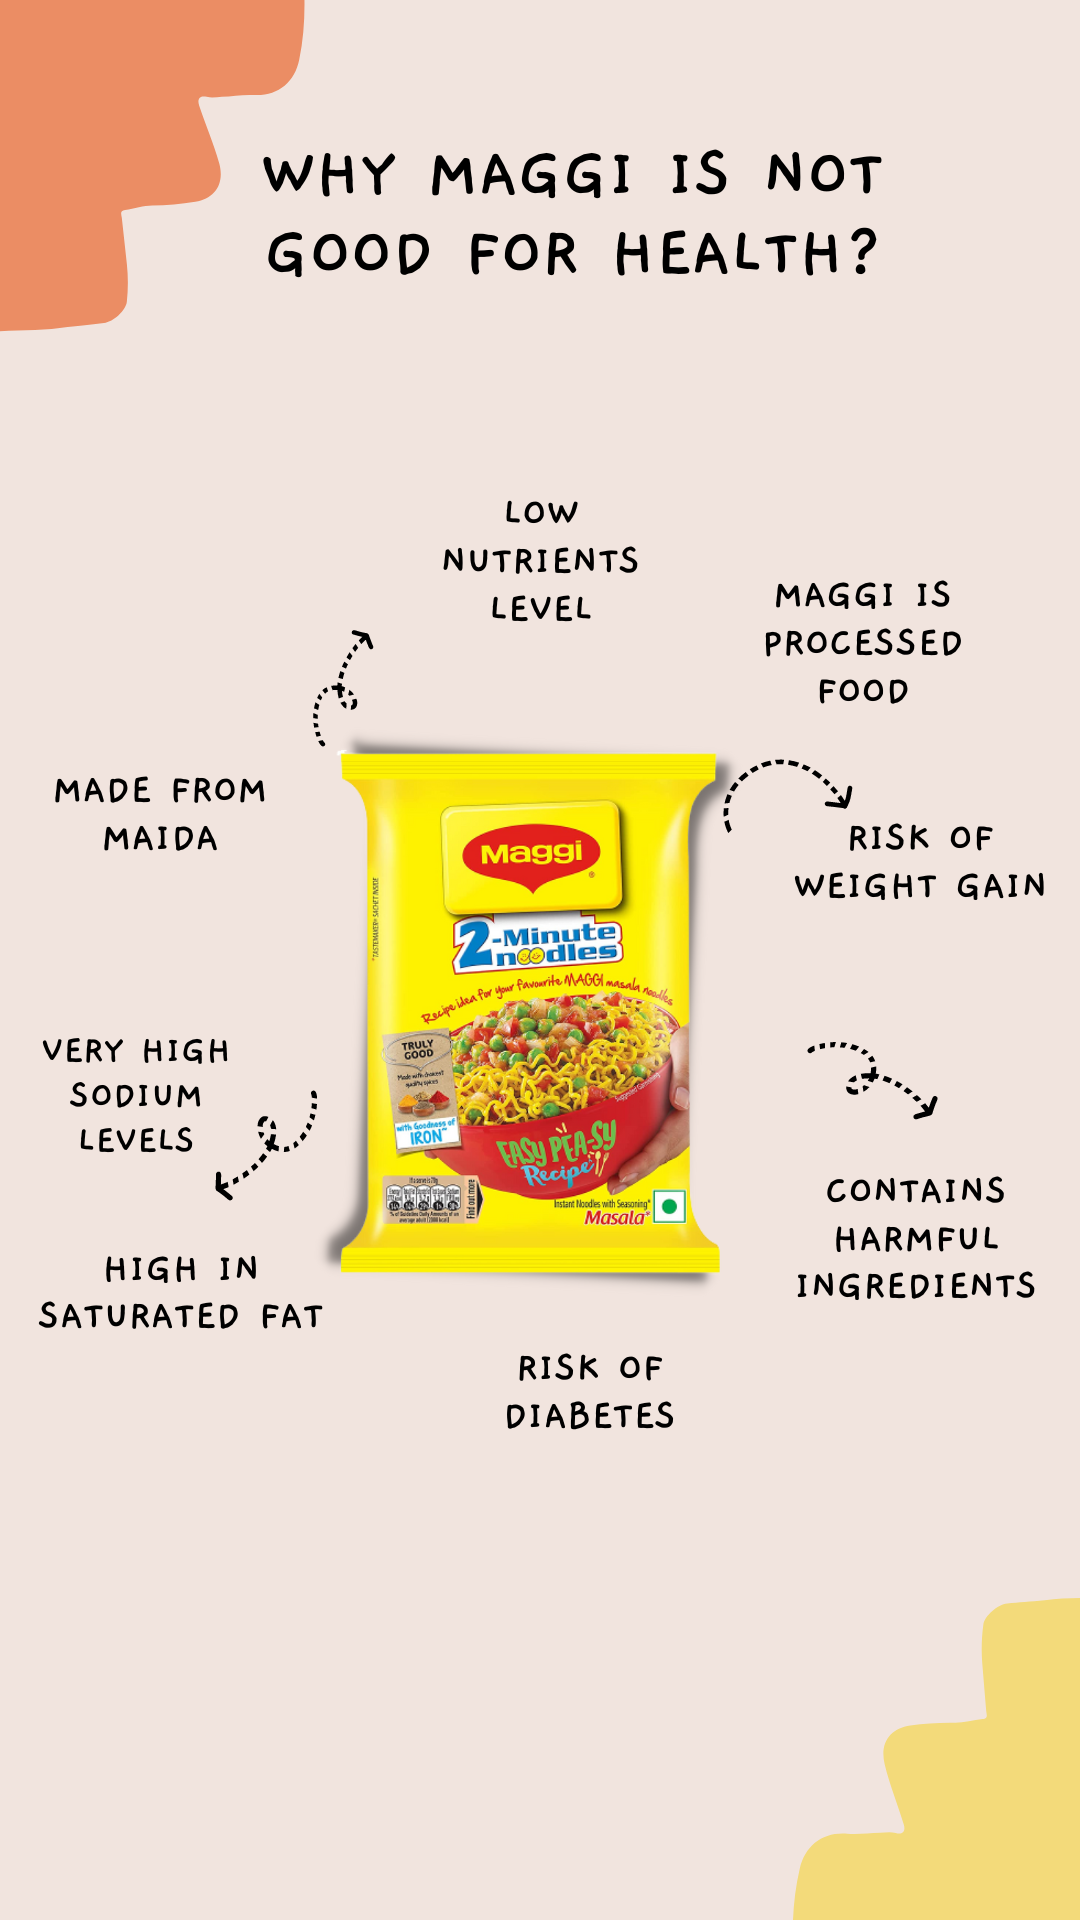 Reasons why maggi is not good for health